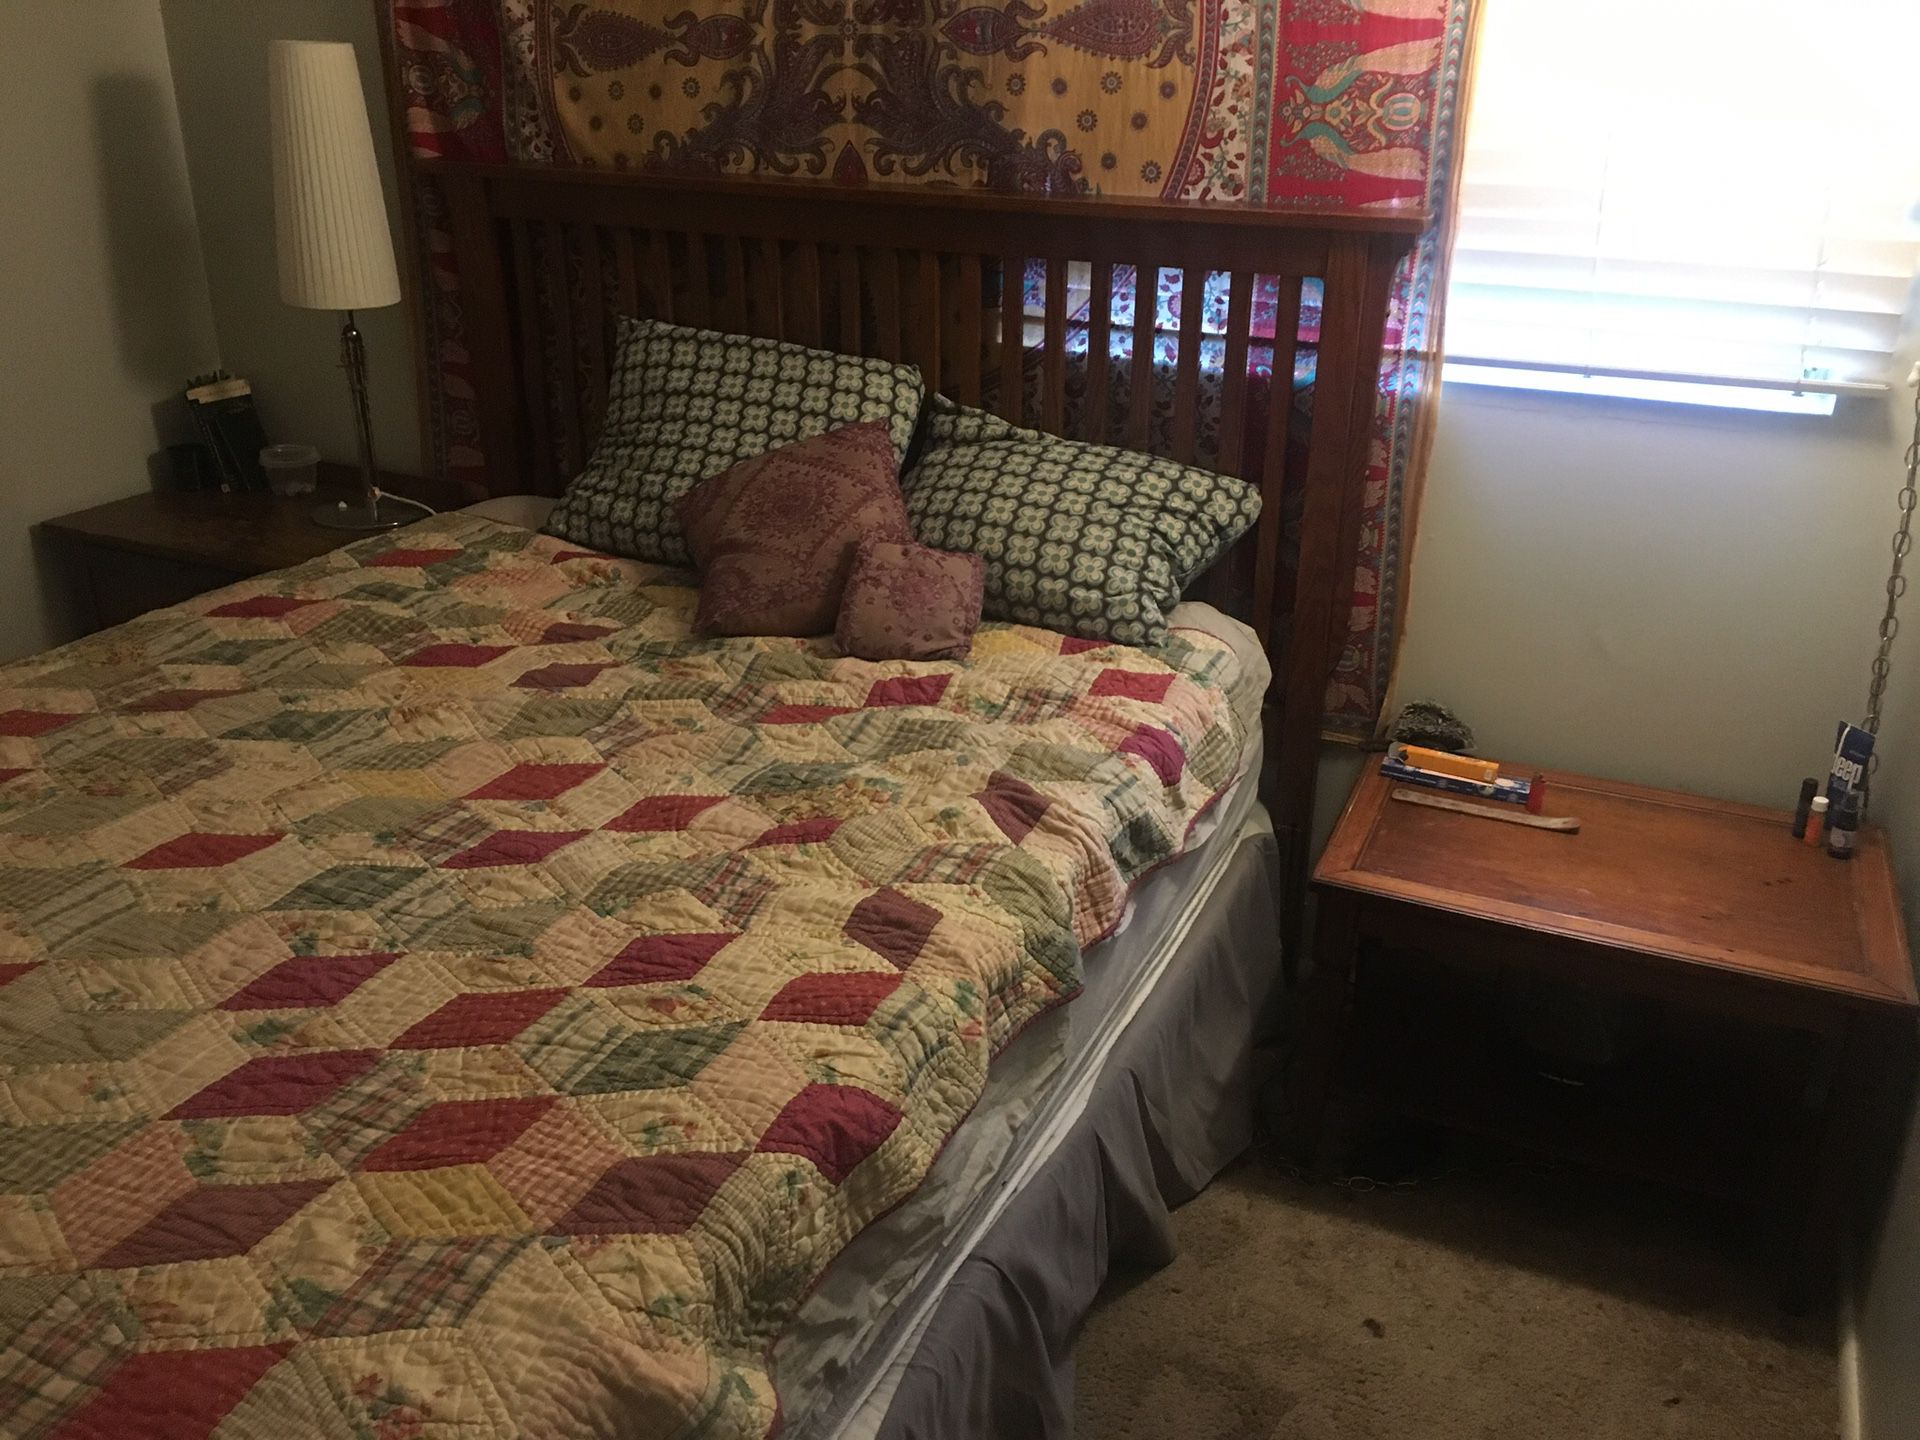 Headboard and bed set